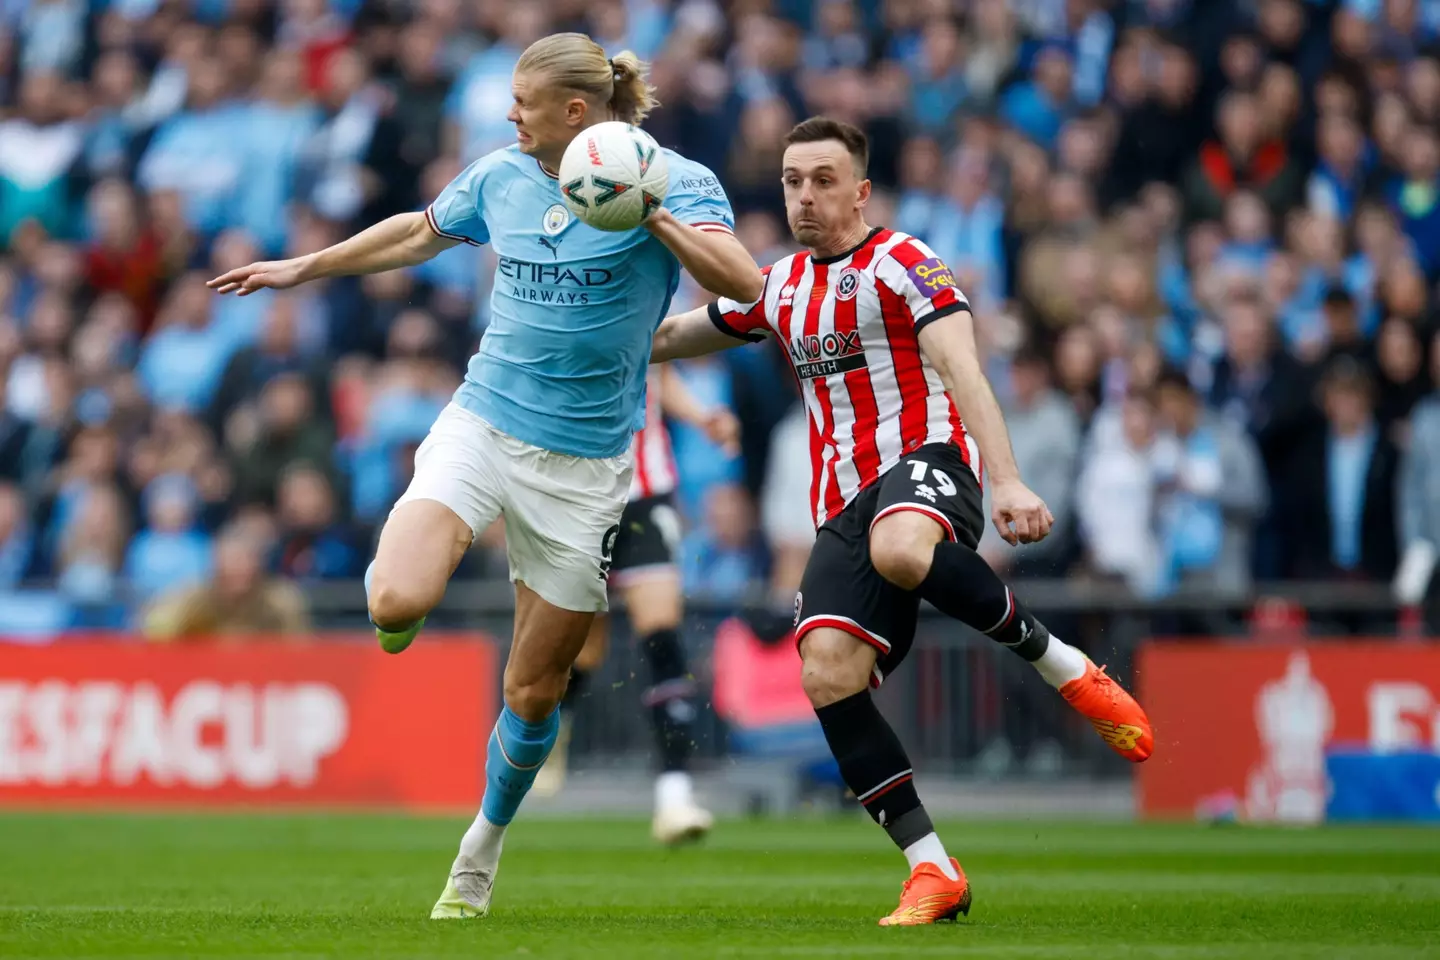 Erling Haaland and Jack Robinson duel for the ball during Manchester City vs. Sheffield United. Image: Alamy 